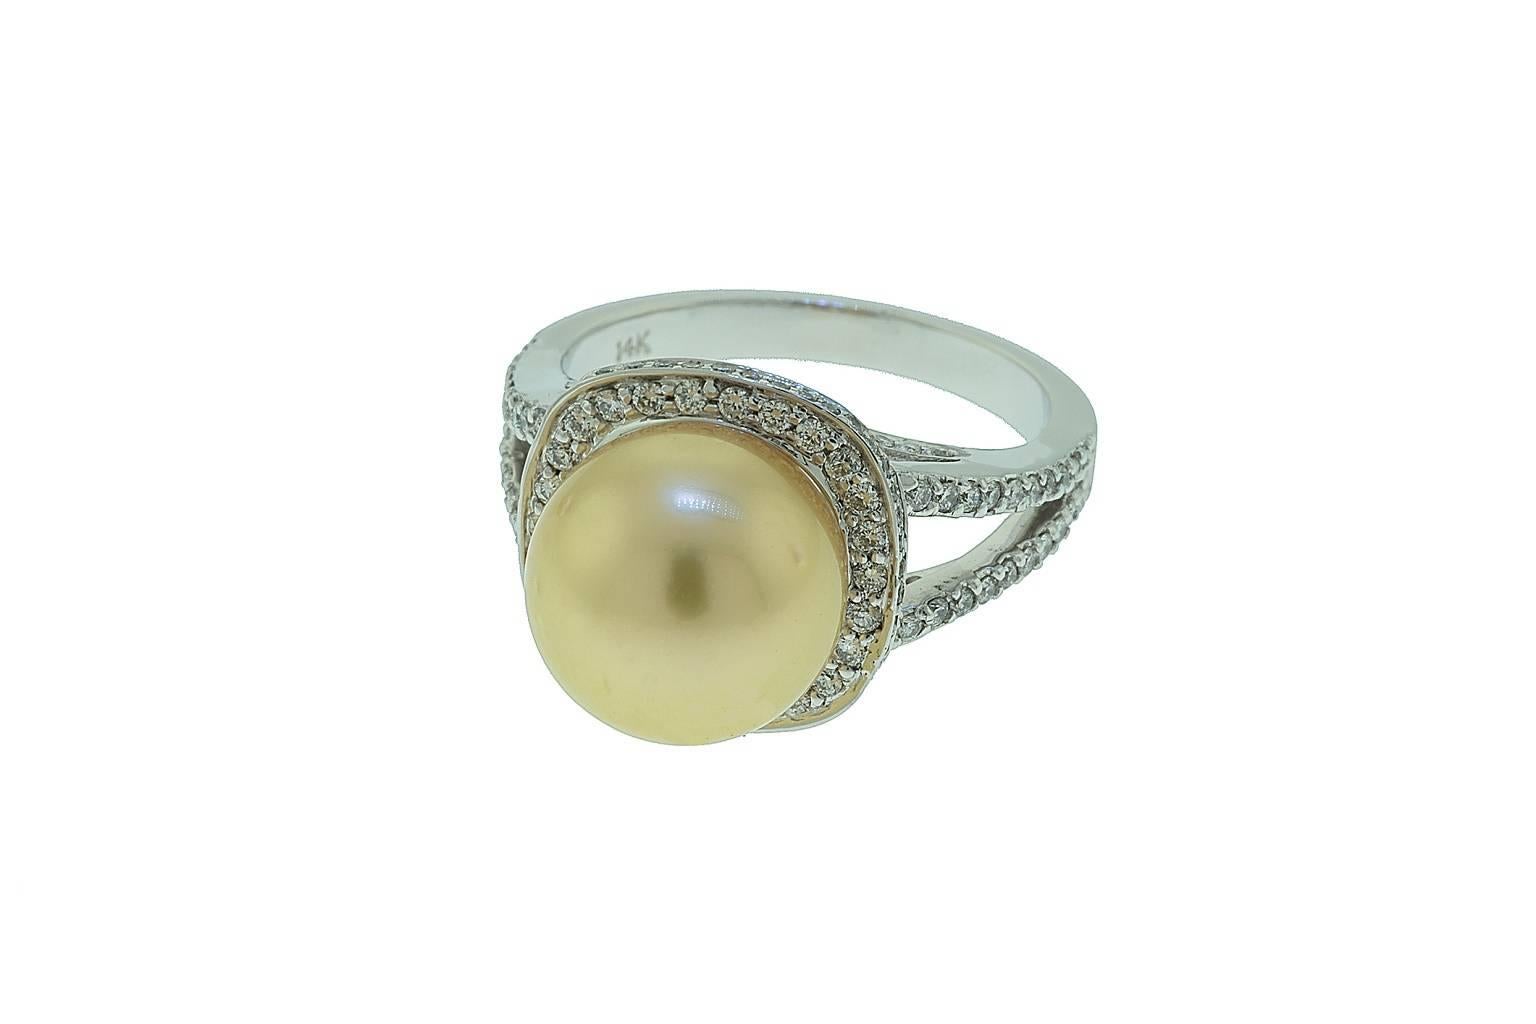 14K white gold ring with 11mm gold color pearl and diamond pave.
The ring is size 7 and can be sized.